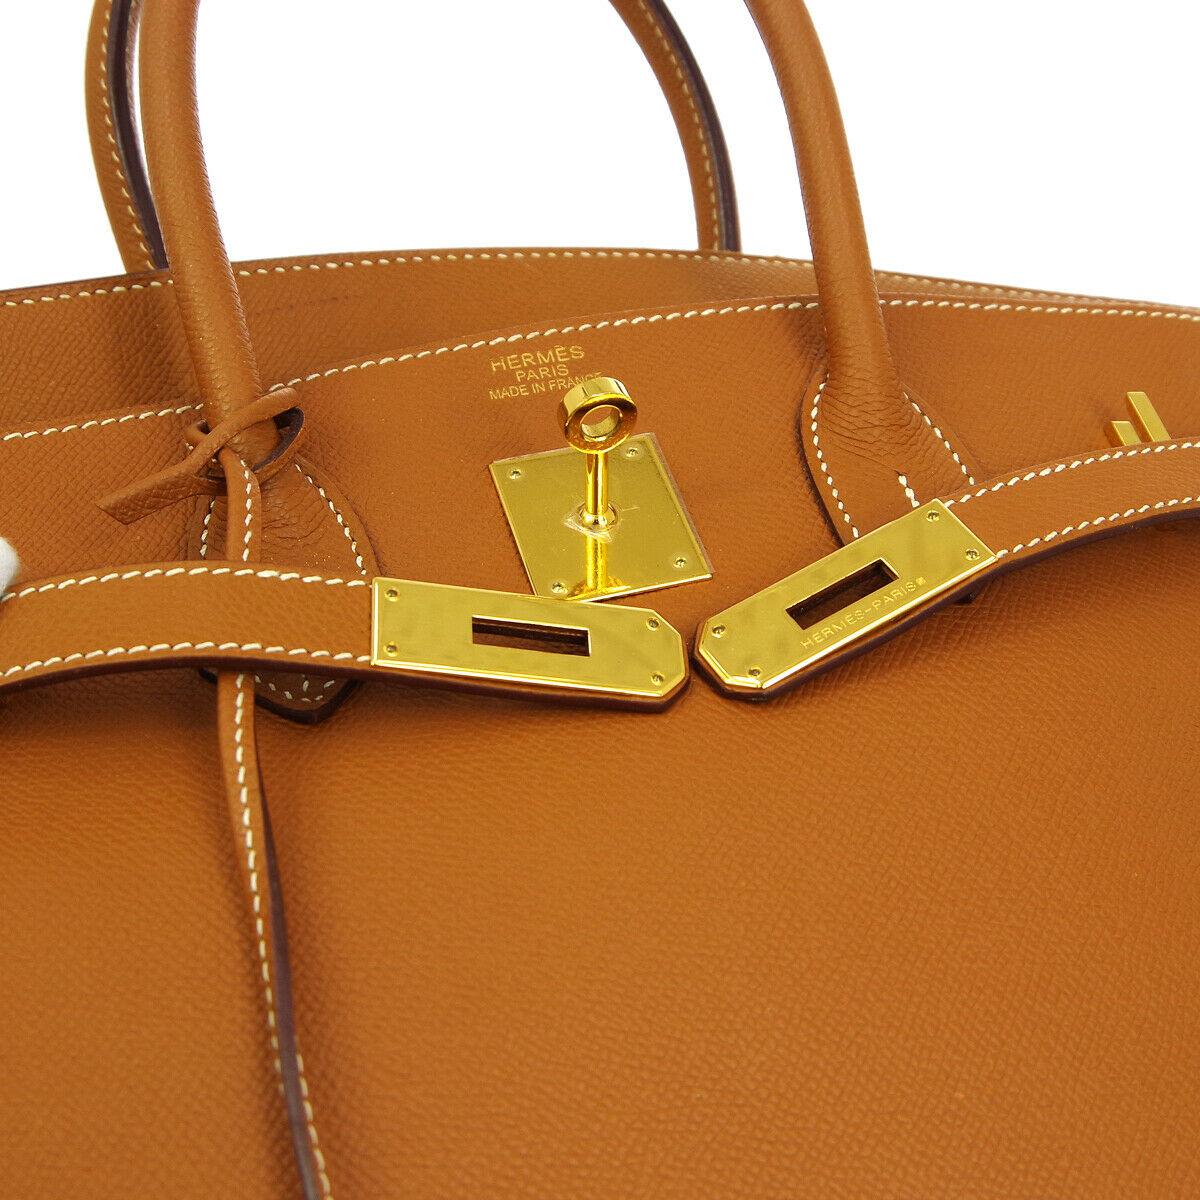 Hermes Birkin 35 Cognac Leather Gold Top Handle Satchel Travel Tote Bag in Box

Leather
Gold tone hardware
Leather lining
Date code present
Made in France
Handle drop 4